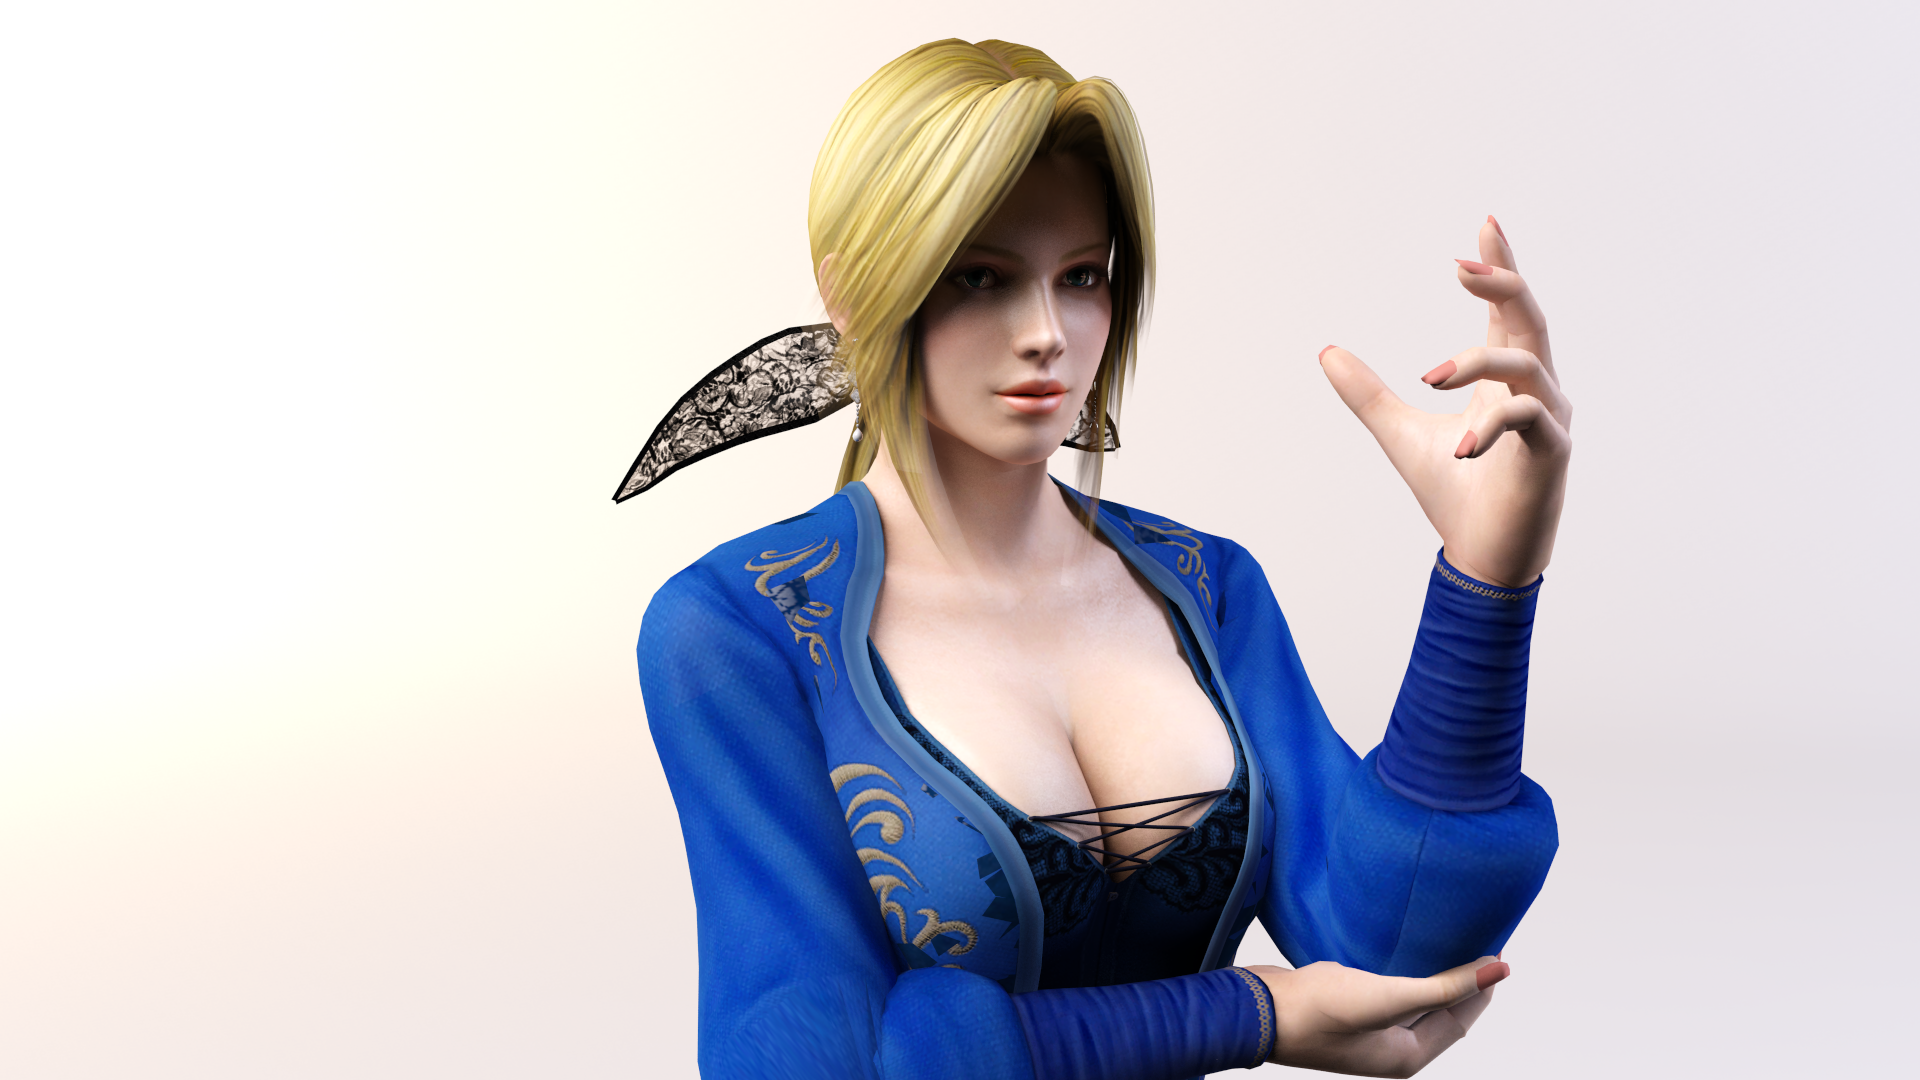 3ds_max___helena_render_2_by_silvermooncrystal-d606p3f.png